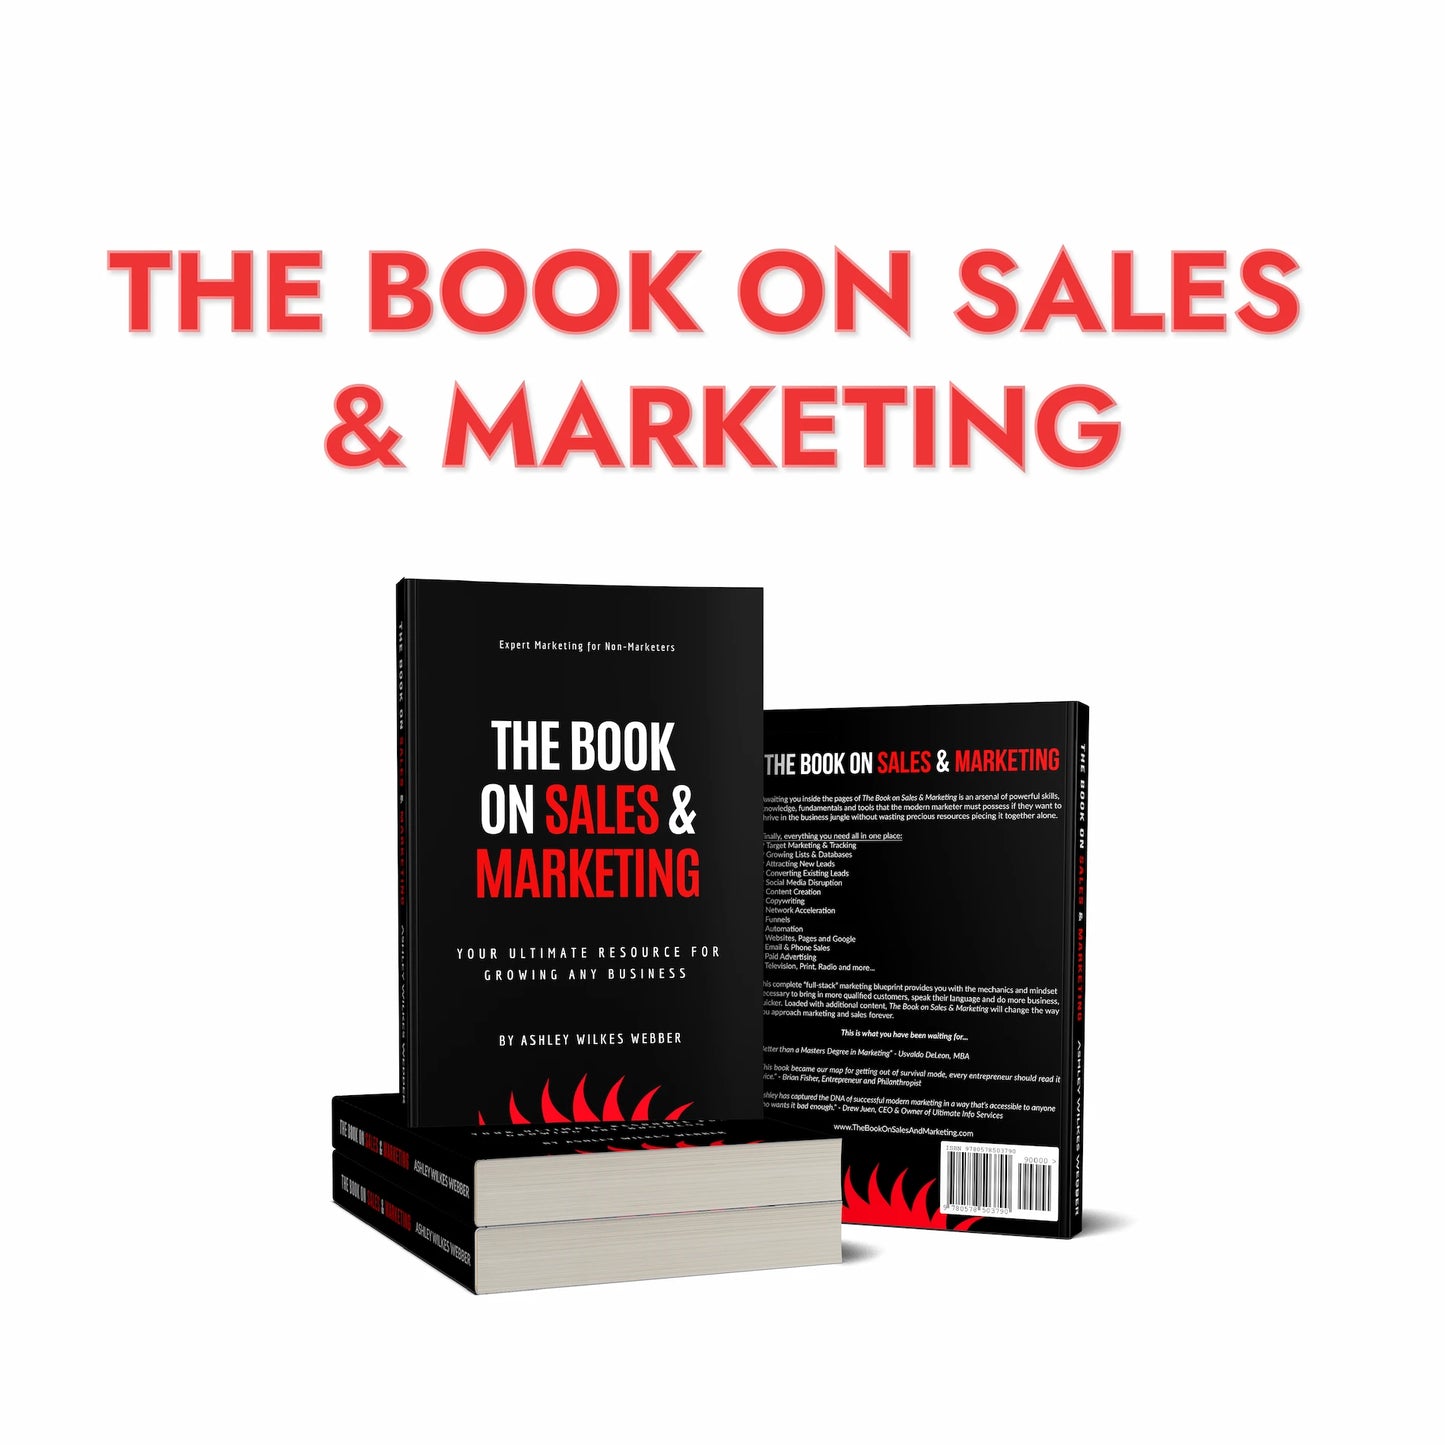 The Book on Sales & Marketing